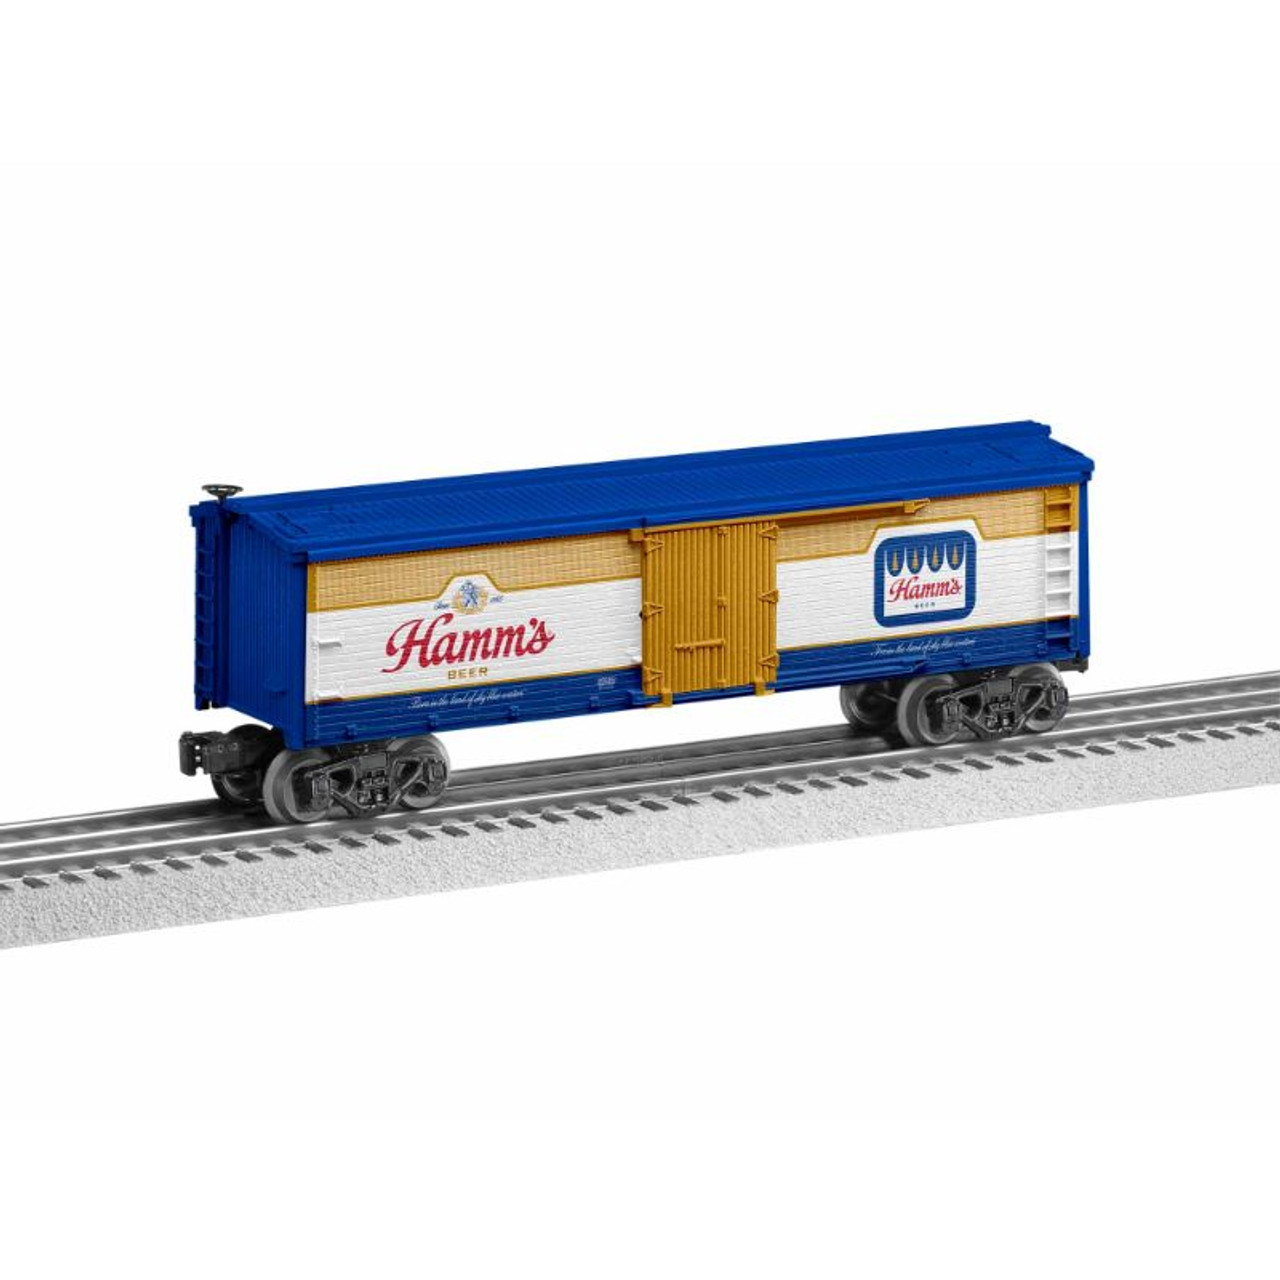 Lionel 1928280 - Hamm's Reefer - O Scale - Midwest Model Railroad